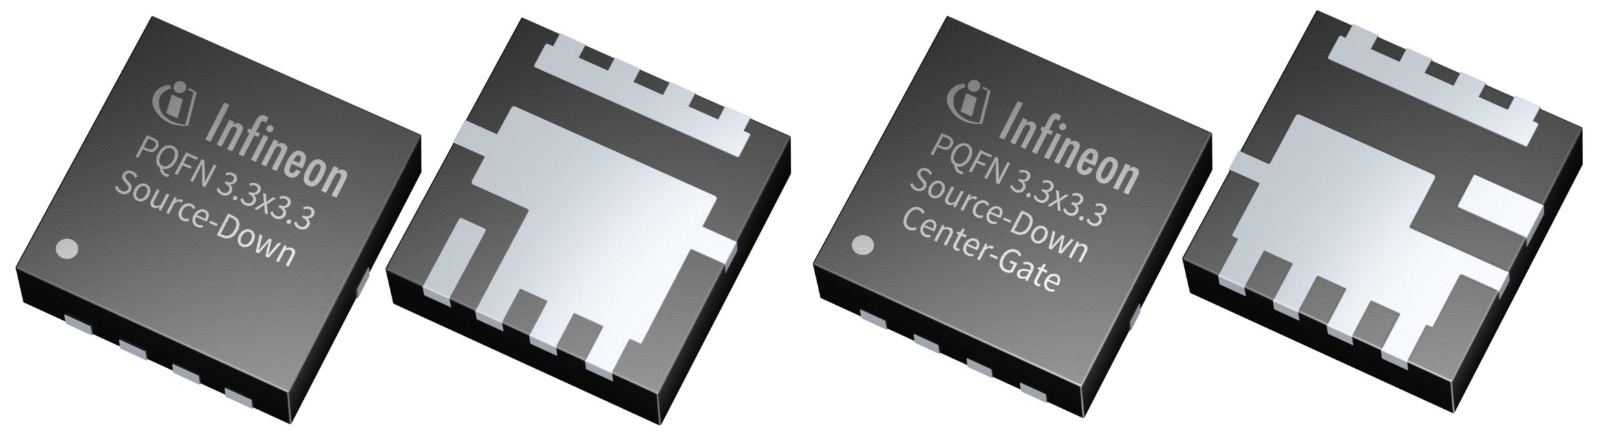 OptiMOS™ power MOSFET Source-Down technology